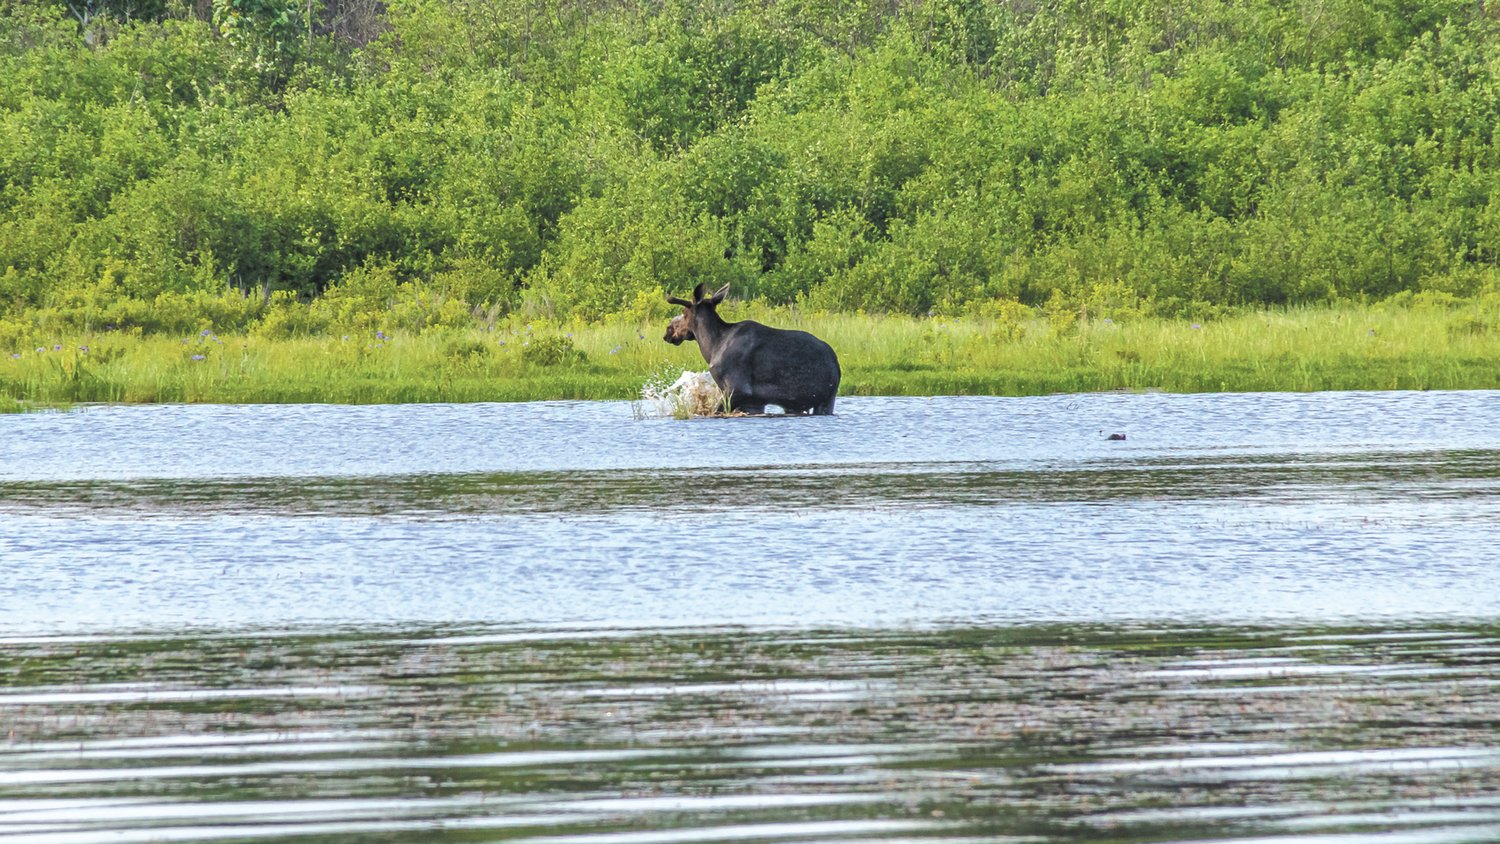 COMPANY:  Wildlife was abundant although not all of it as large as this moose.